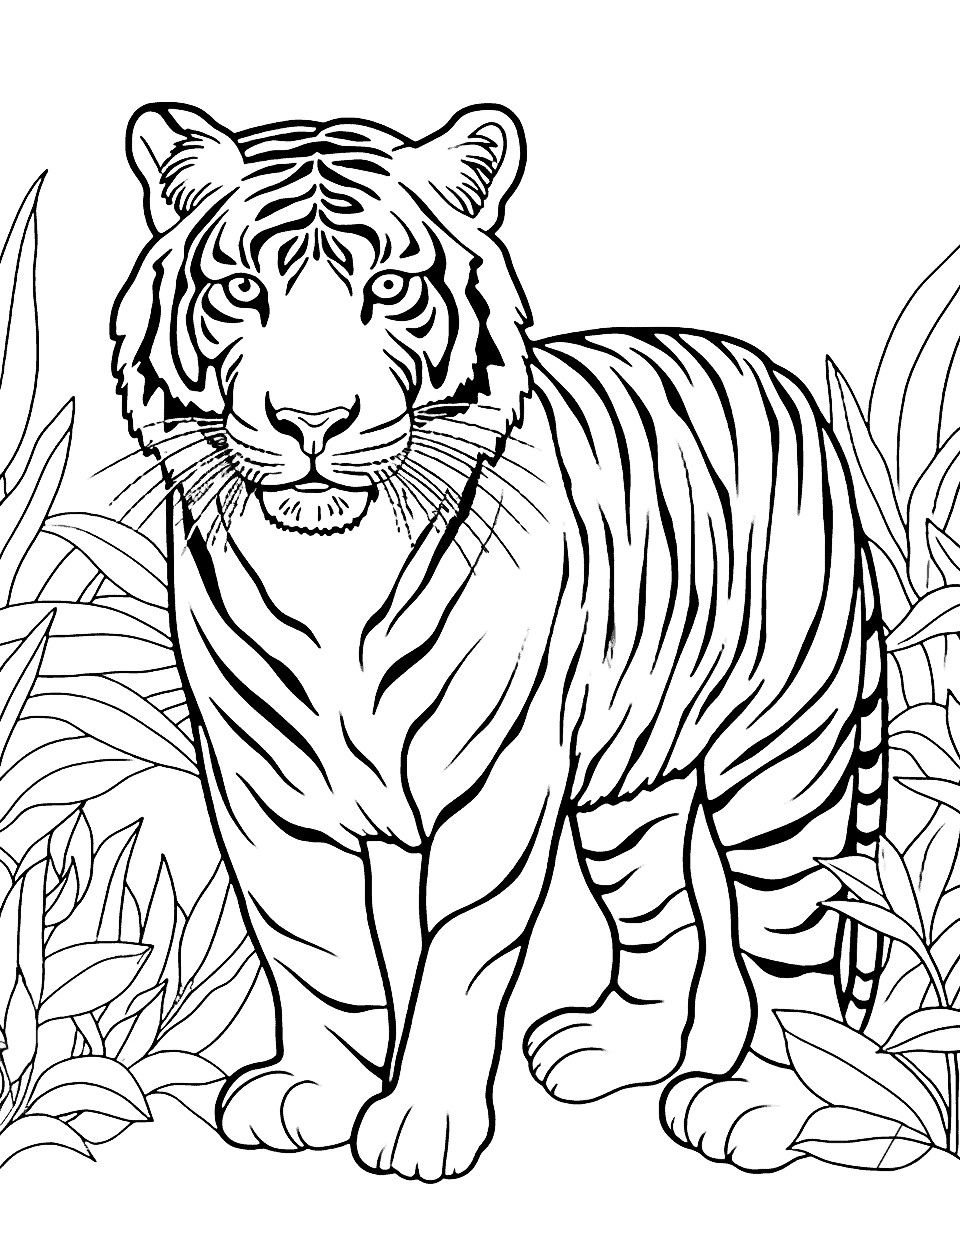 75 Animal Coloring Pages: Free Printable Sheets in Free Printable Wild Animal Coloring Pages